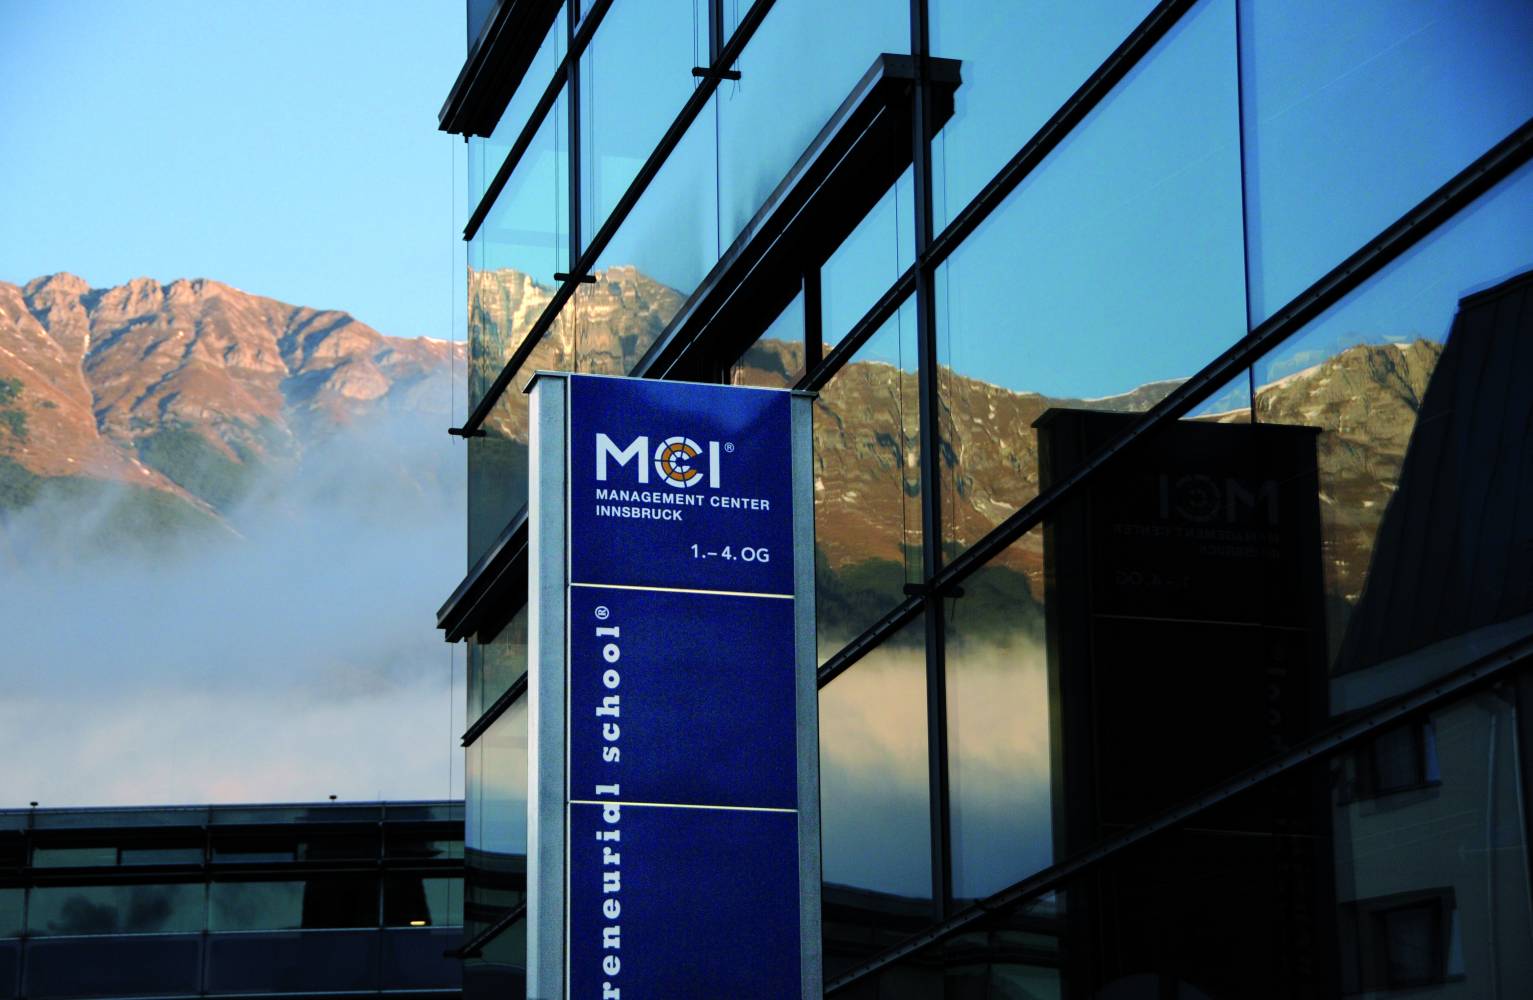 According to the industry mgazin ranking, Austrian decision-makers and human resources managers recommend the MBA programs of the MCI. Photo: MCI